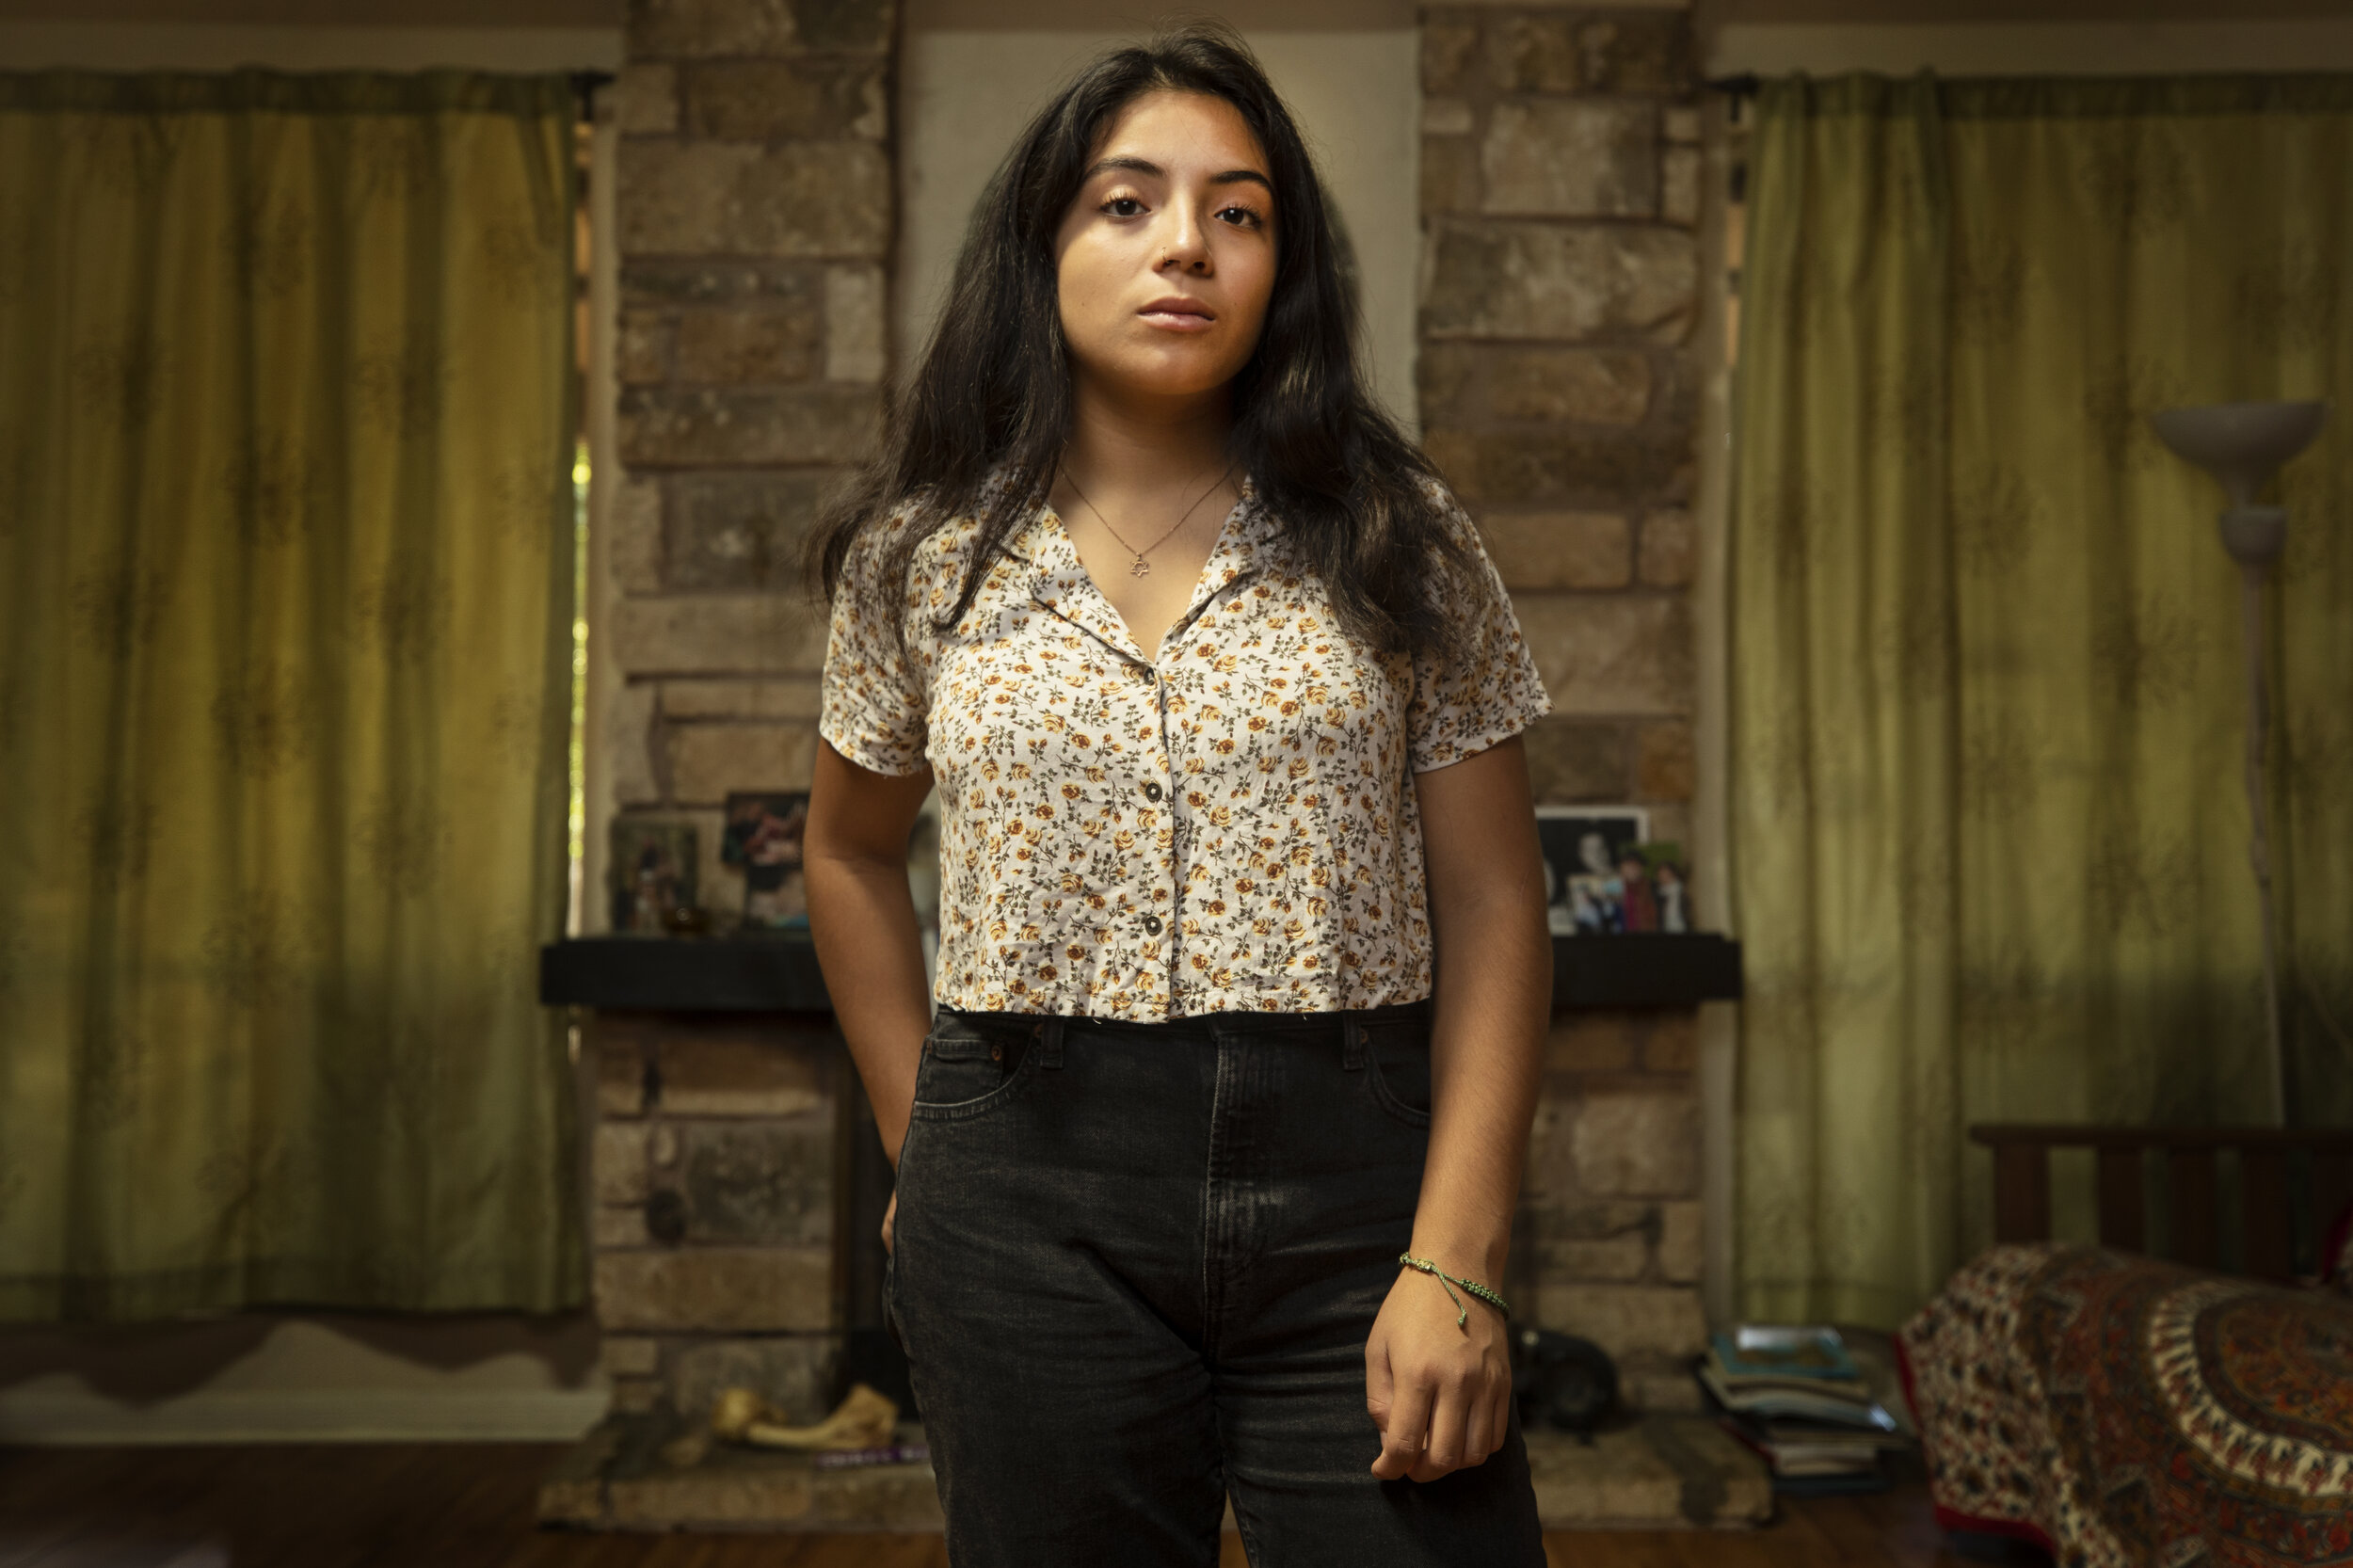  AUSTIN, TX. Somaya Jimenez-Haham says when she started school at Liberal Arts and Science Academy, Austin ISD's elite magnet high school, she felt like she had to prove she earned the spot. She is one of LASA’s students working to change the school’